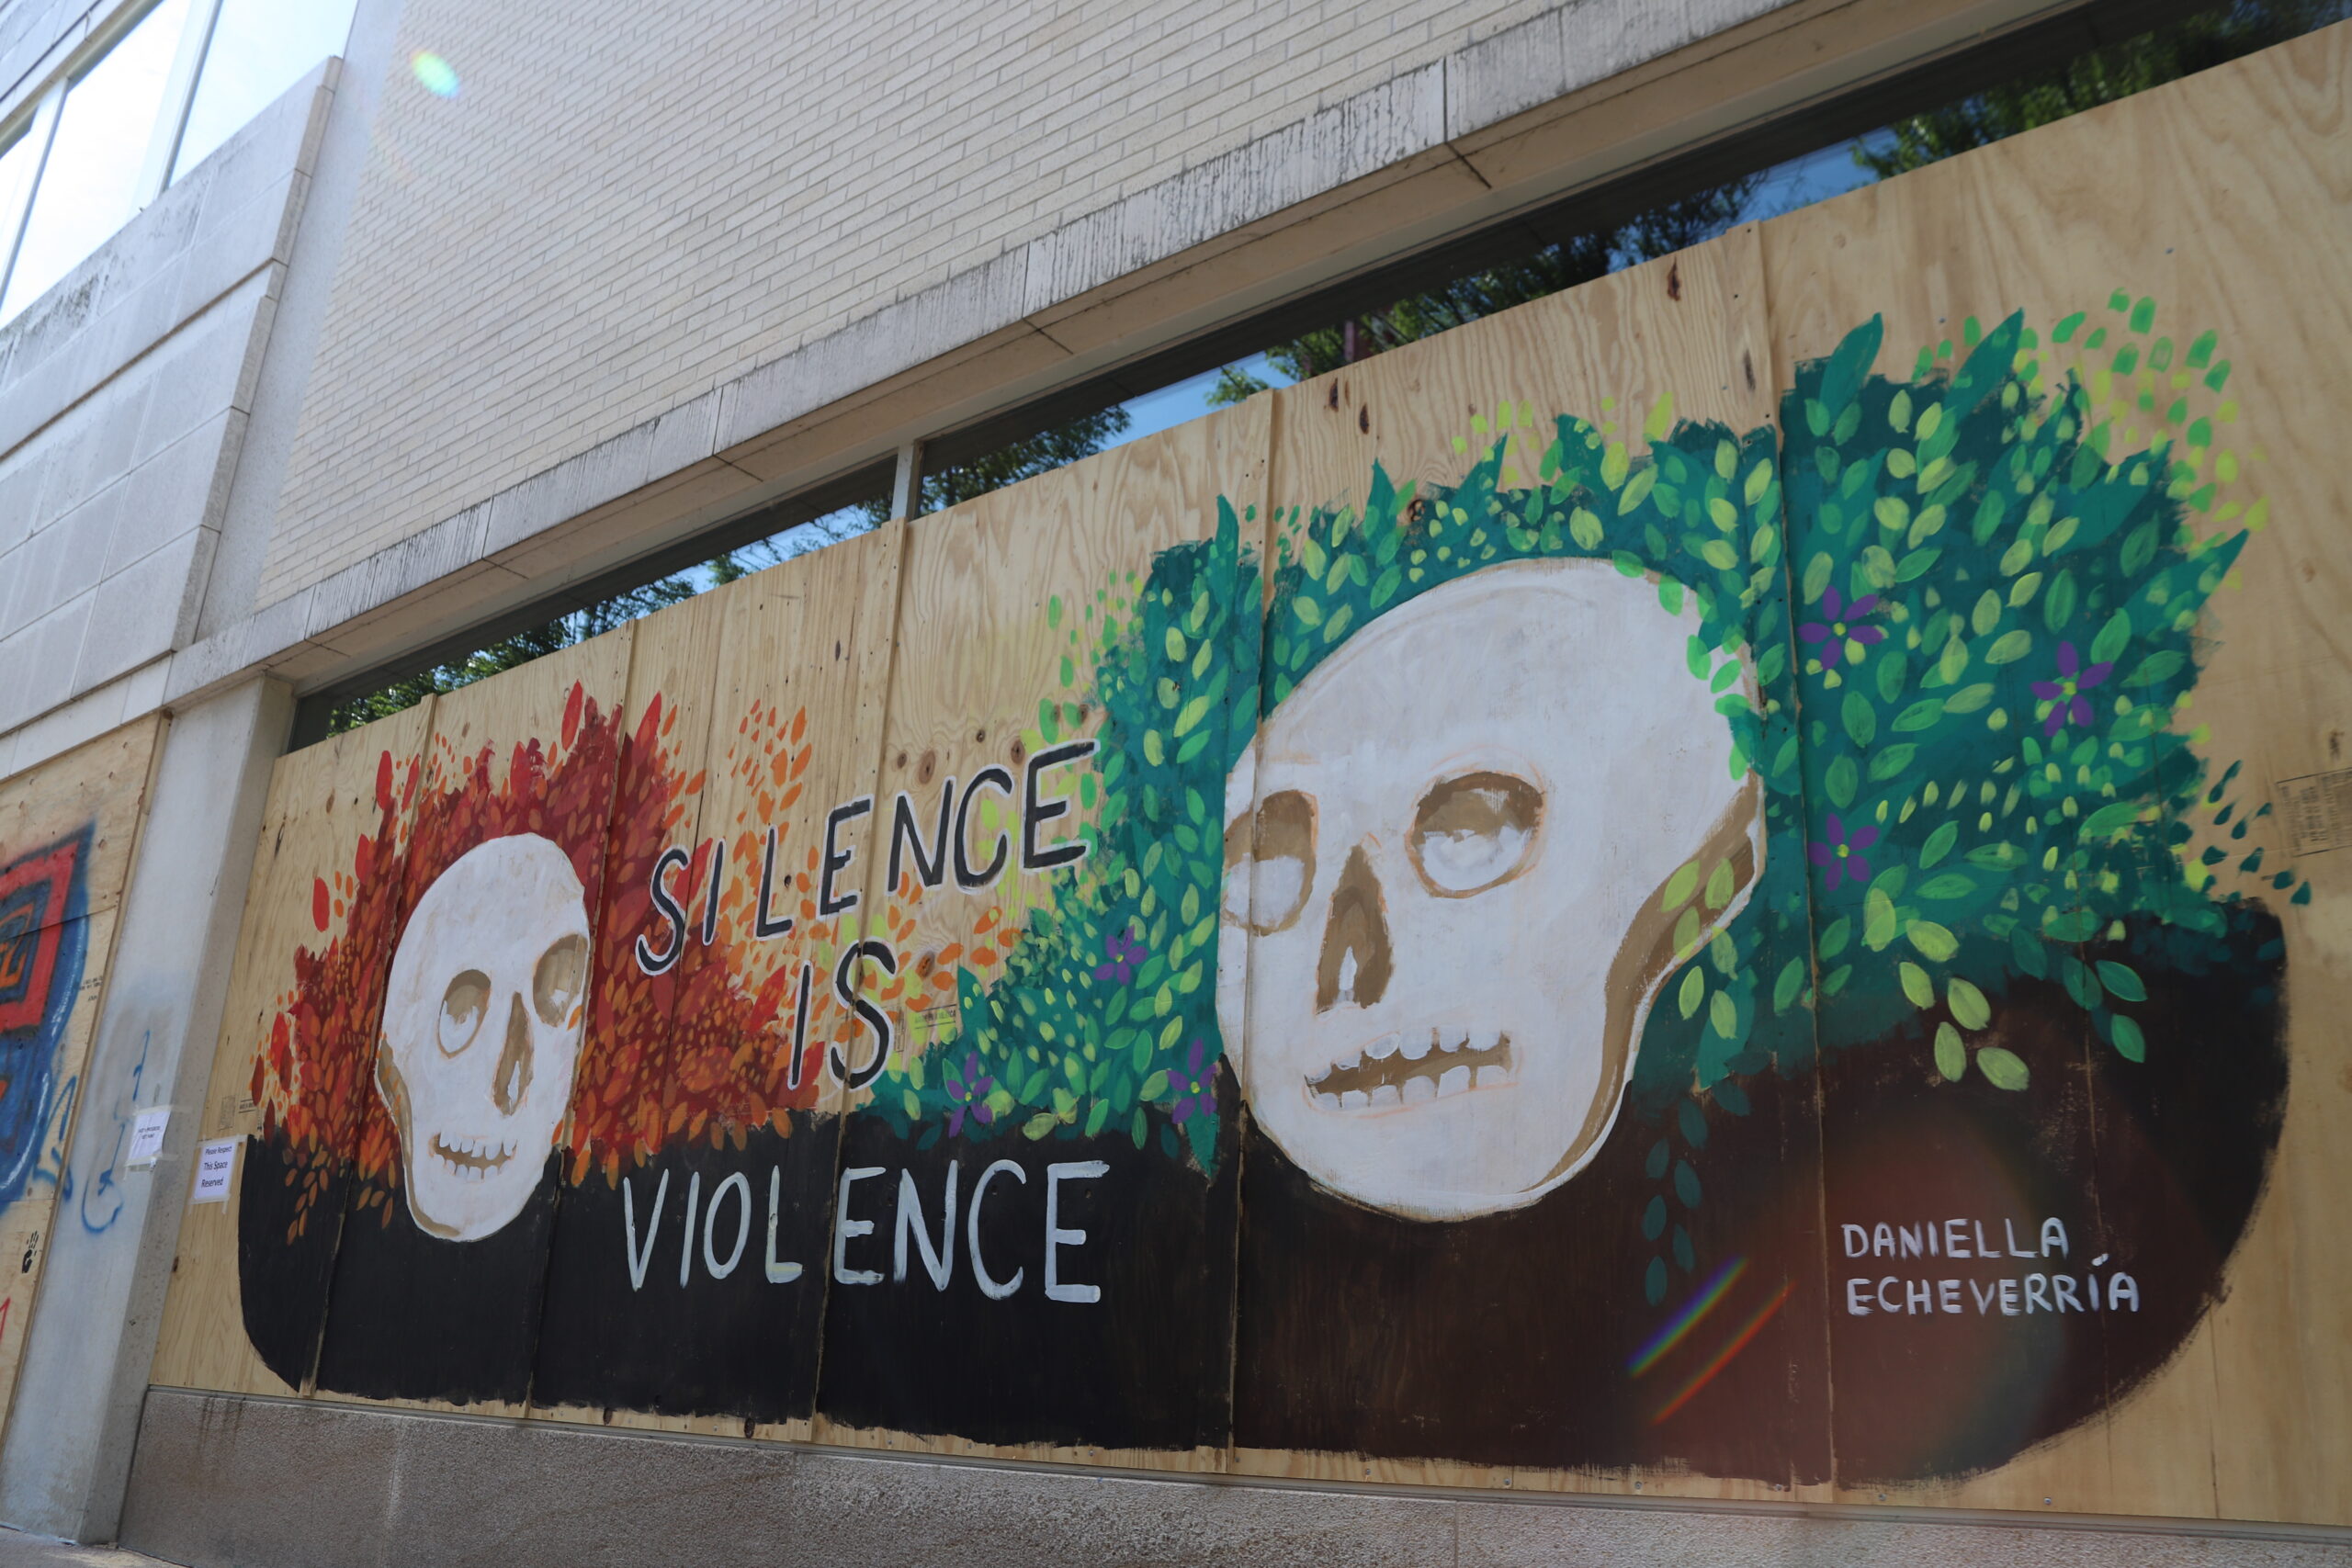 A protest mural that reads "Silence is violence"